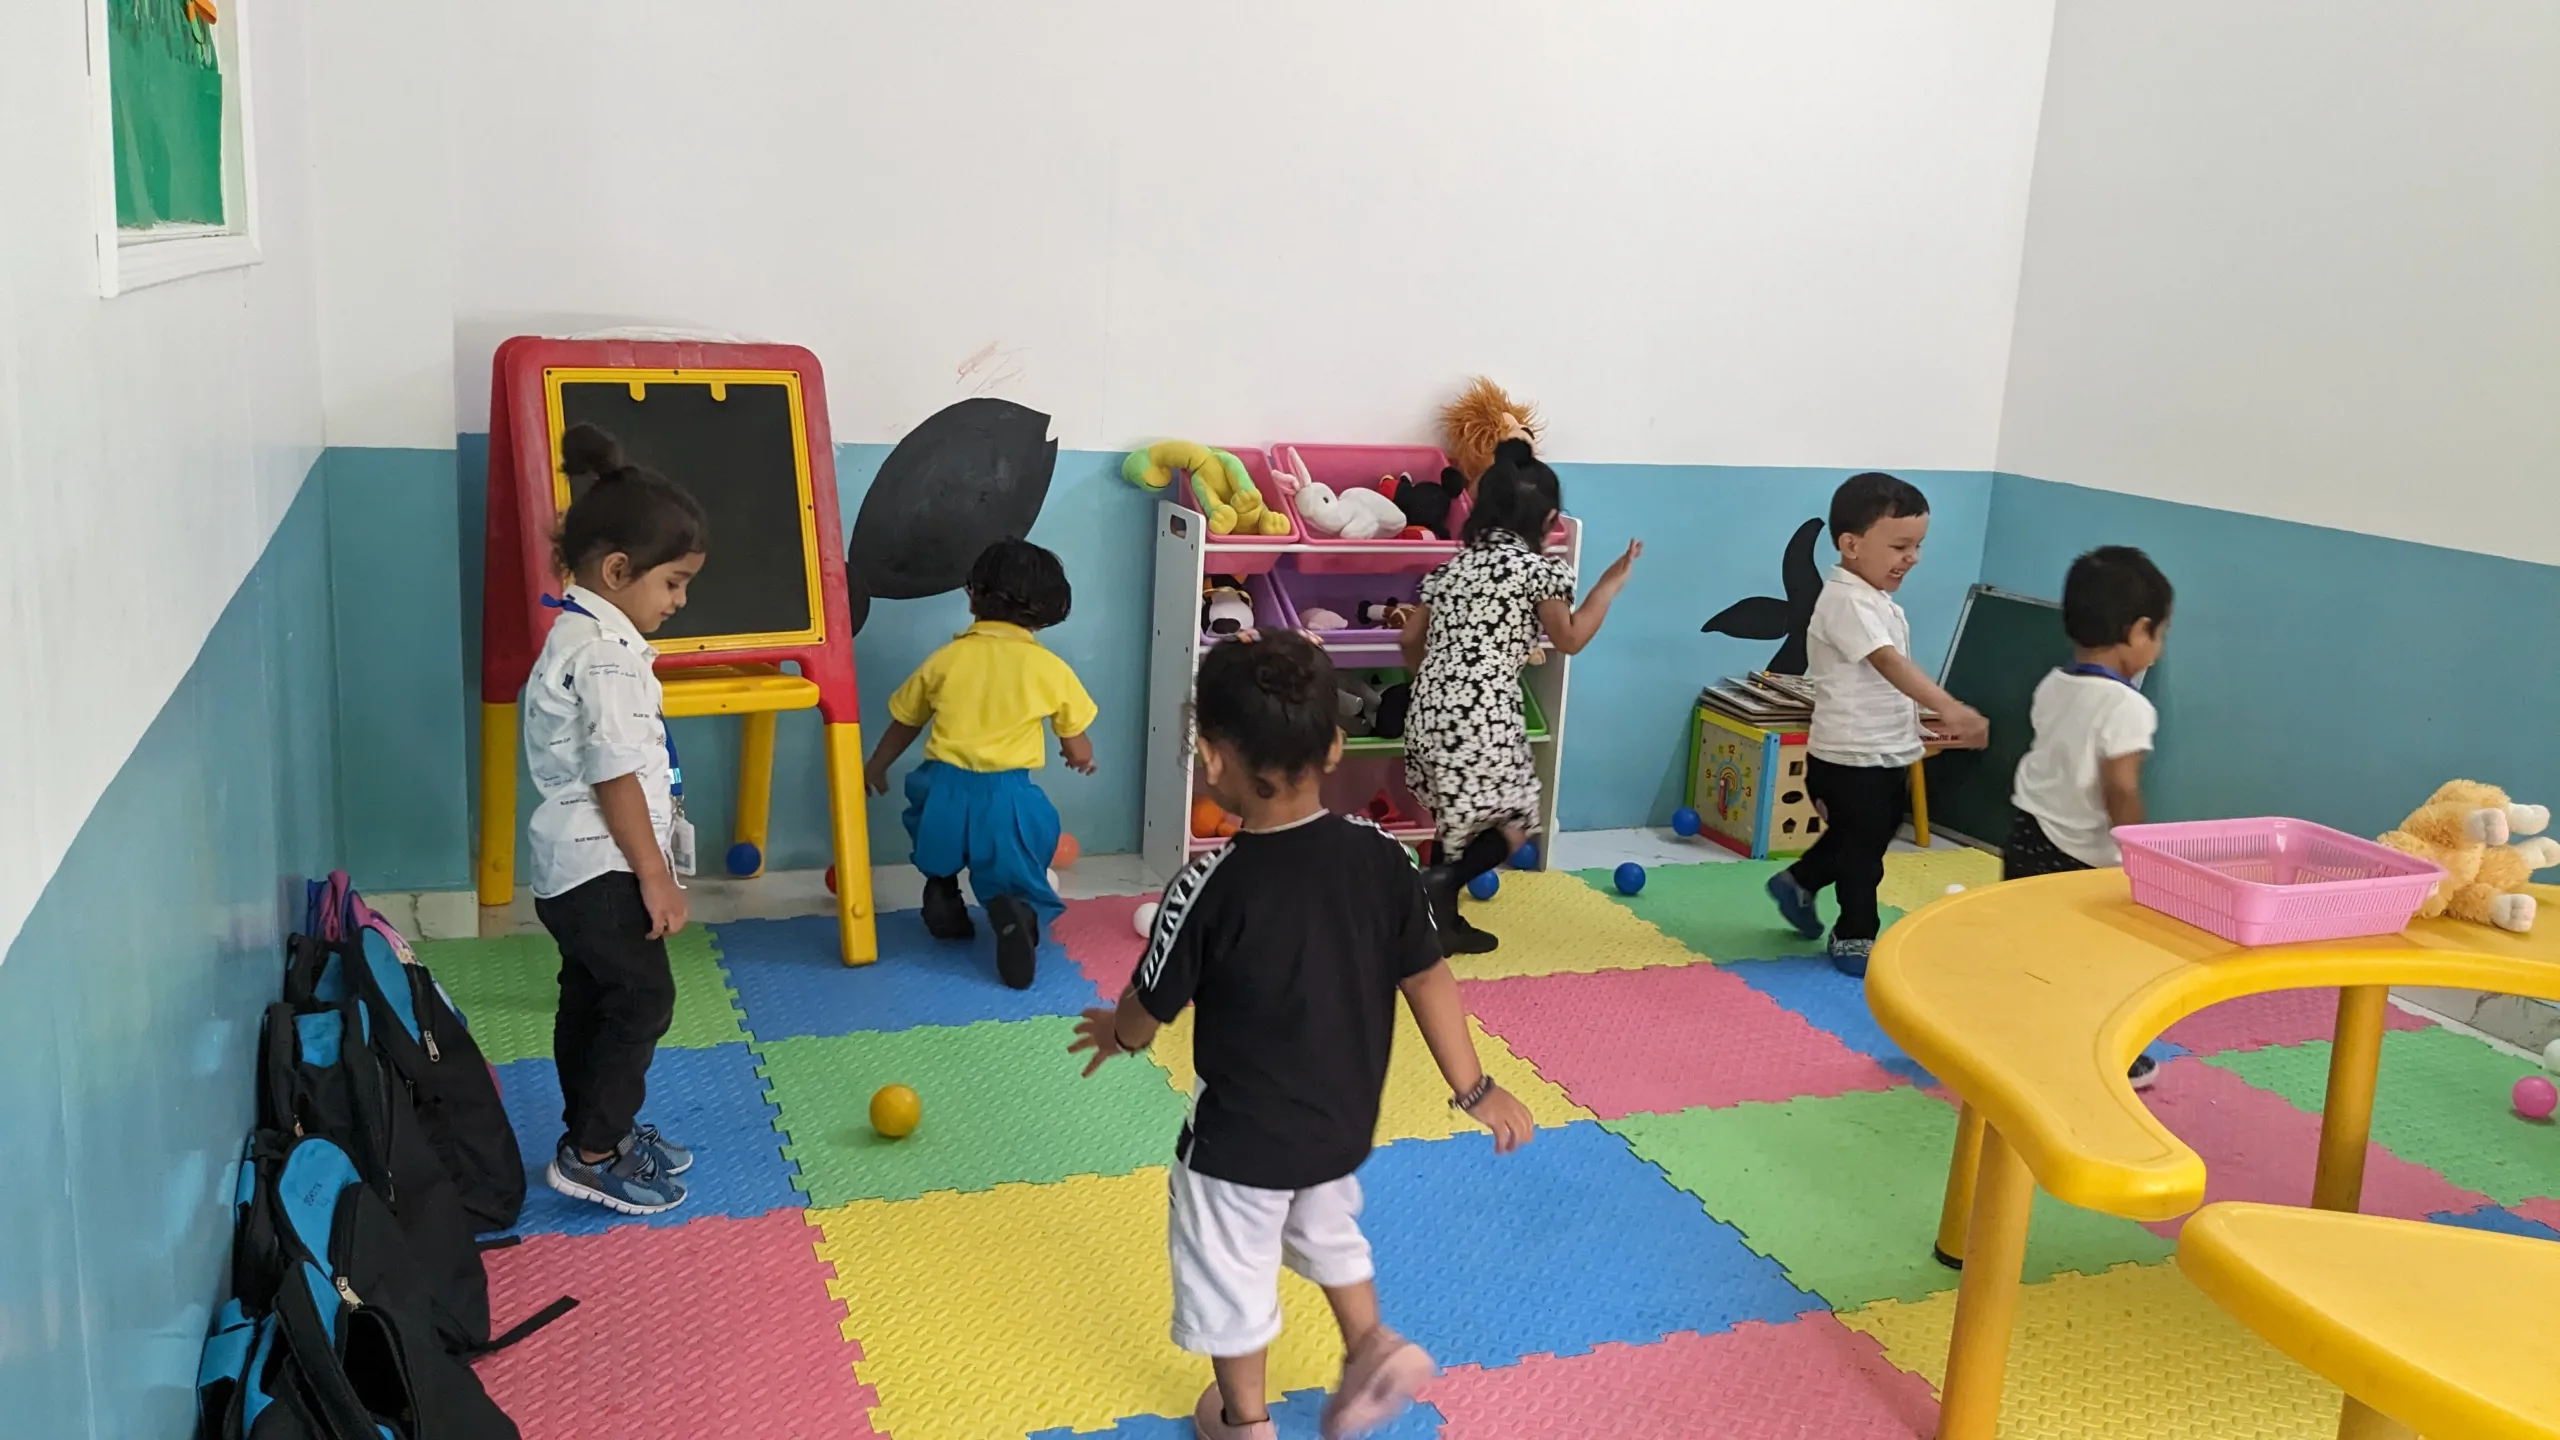 Our children playing for Physical development